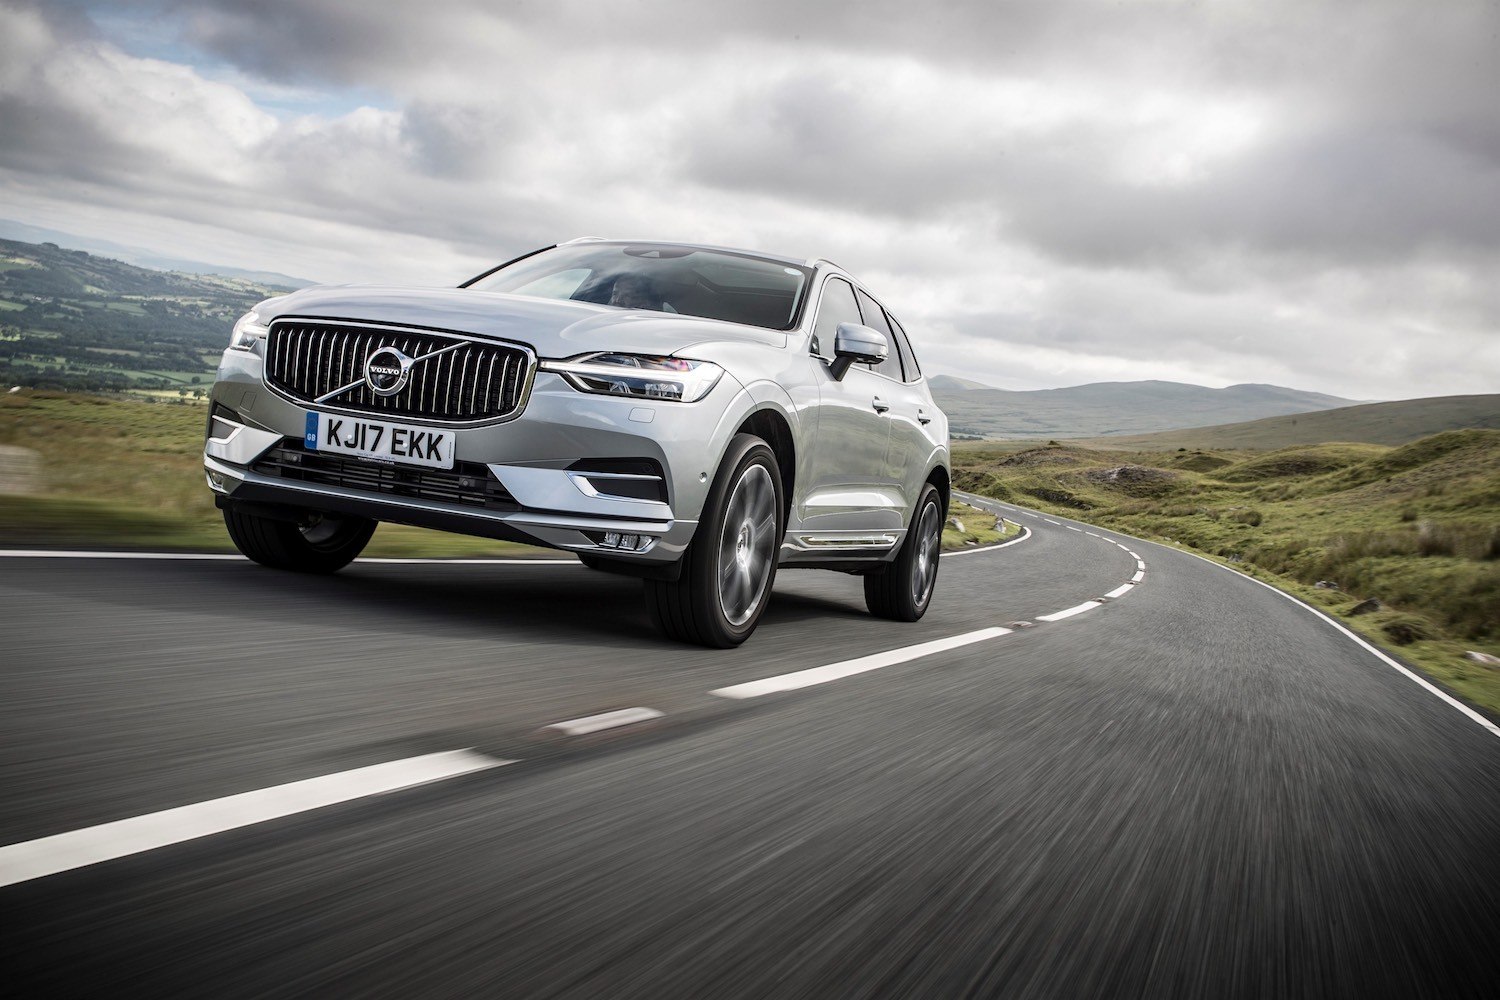 Neil Lyndon reviews the All New Volvo XC60 for Drive 10